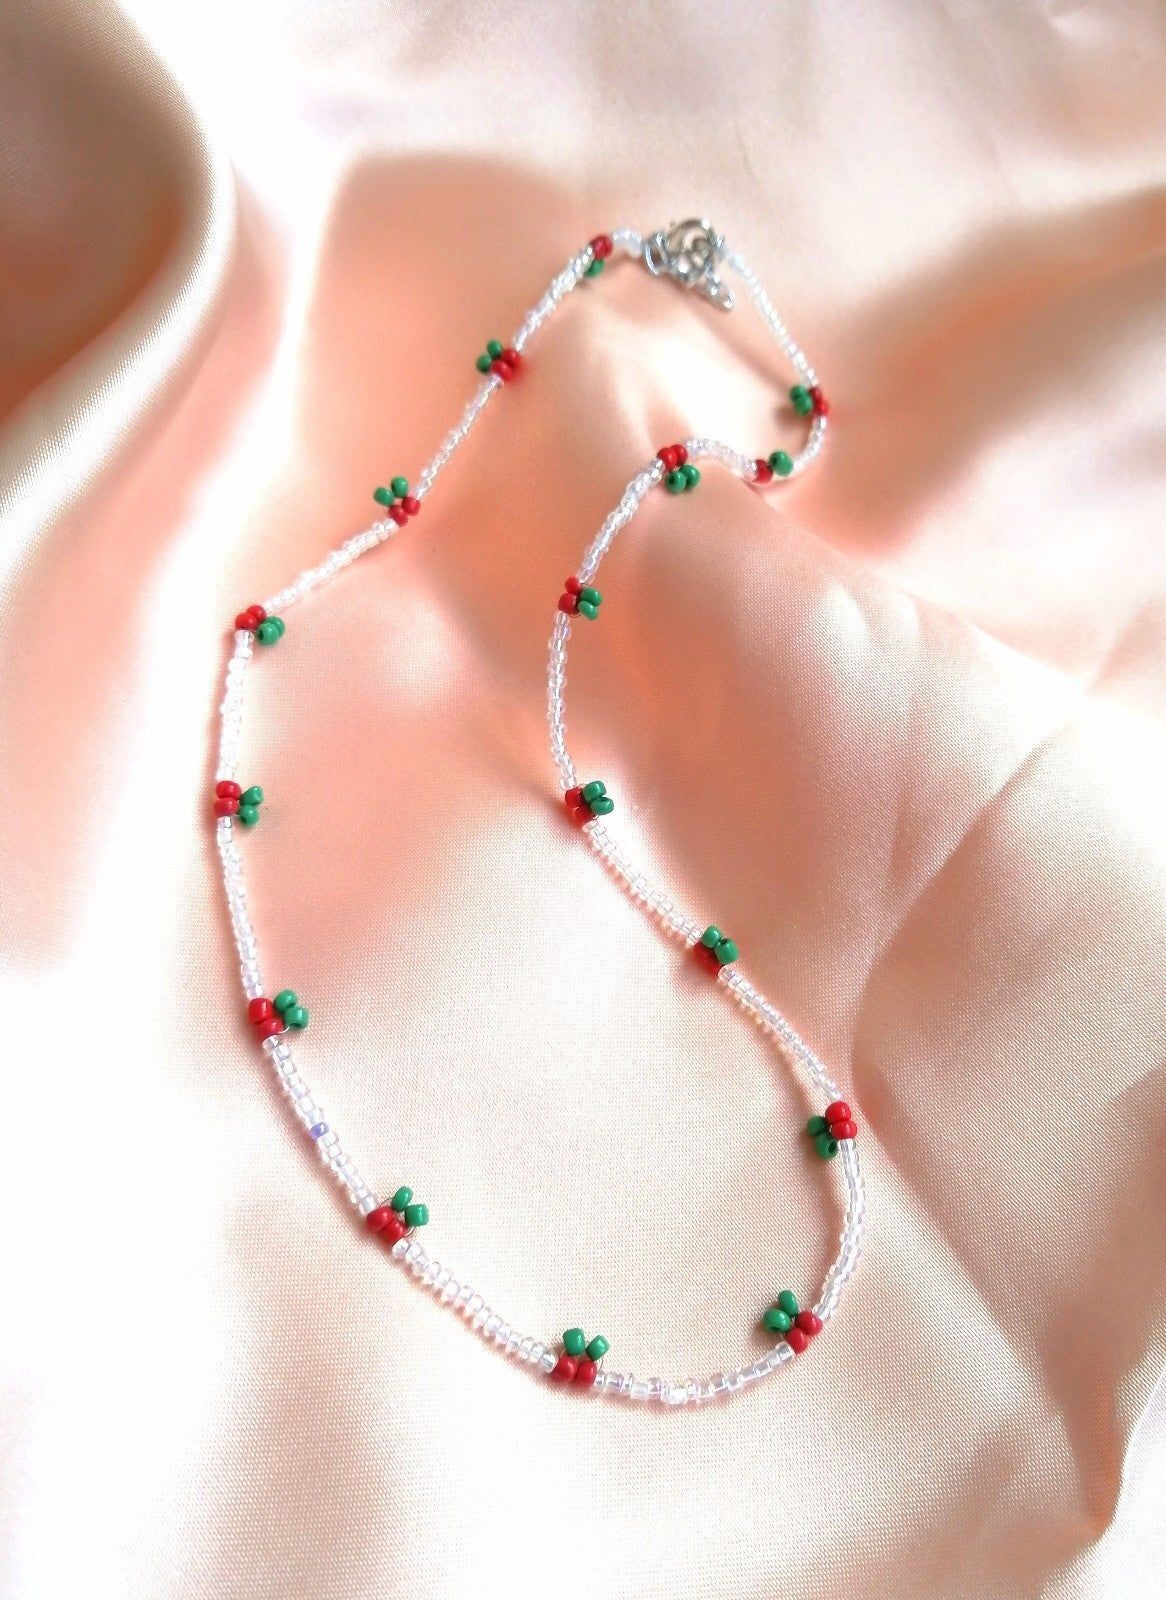 How to make a beaded necklace?